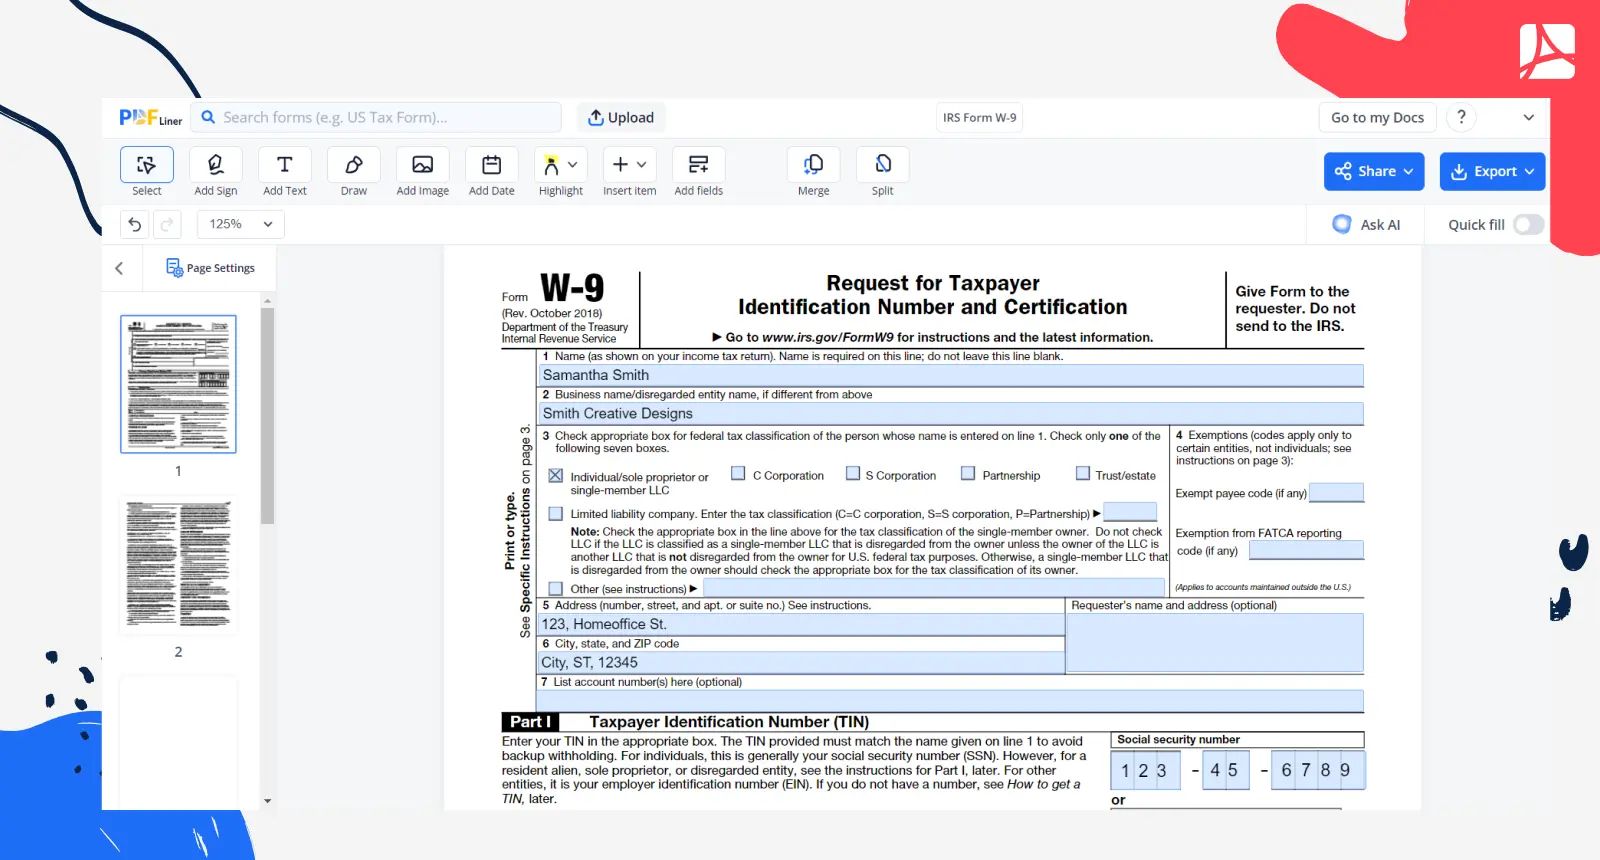 Form W-9 second example screenshot